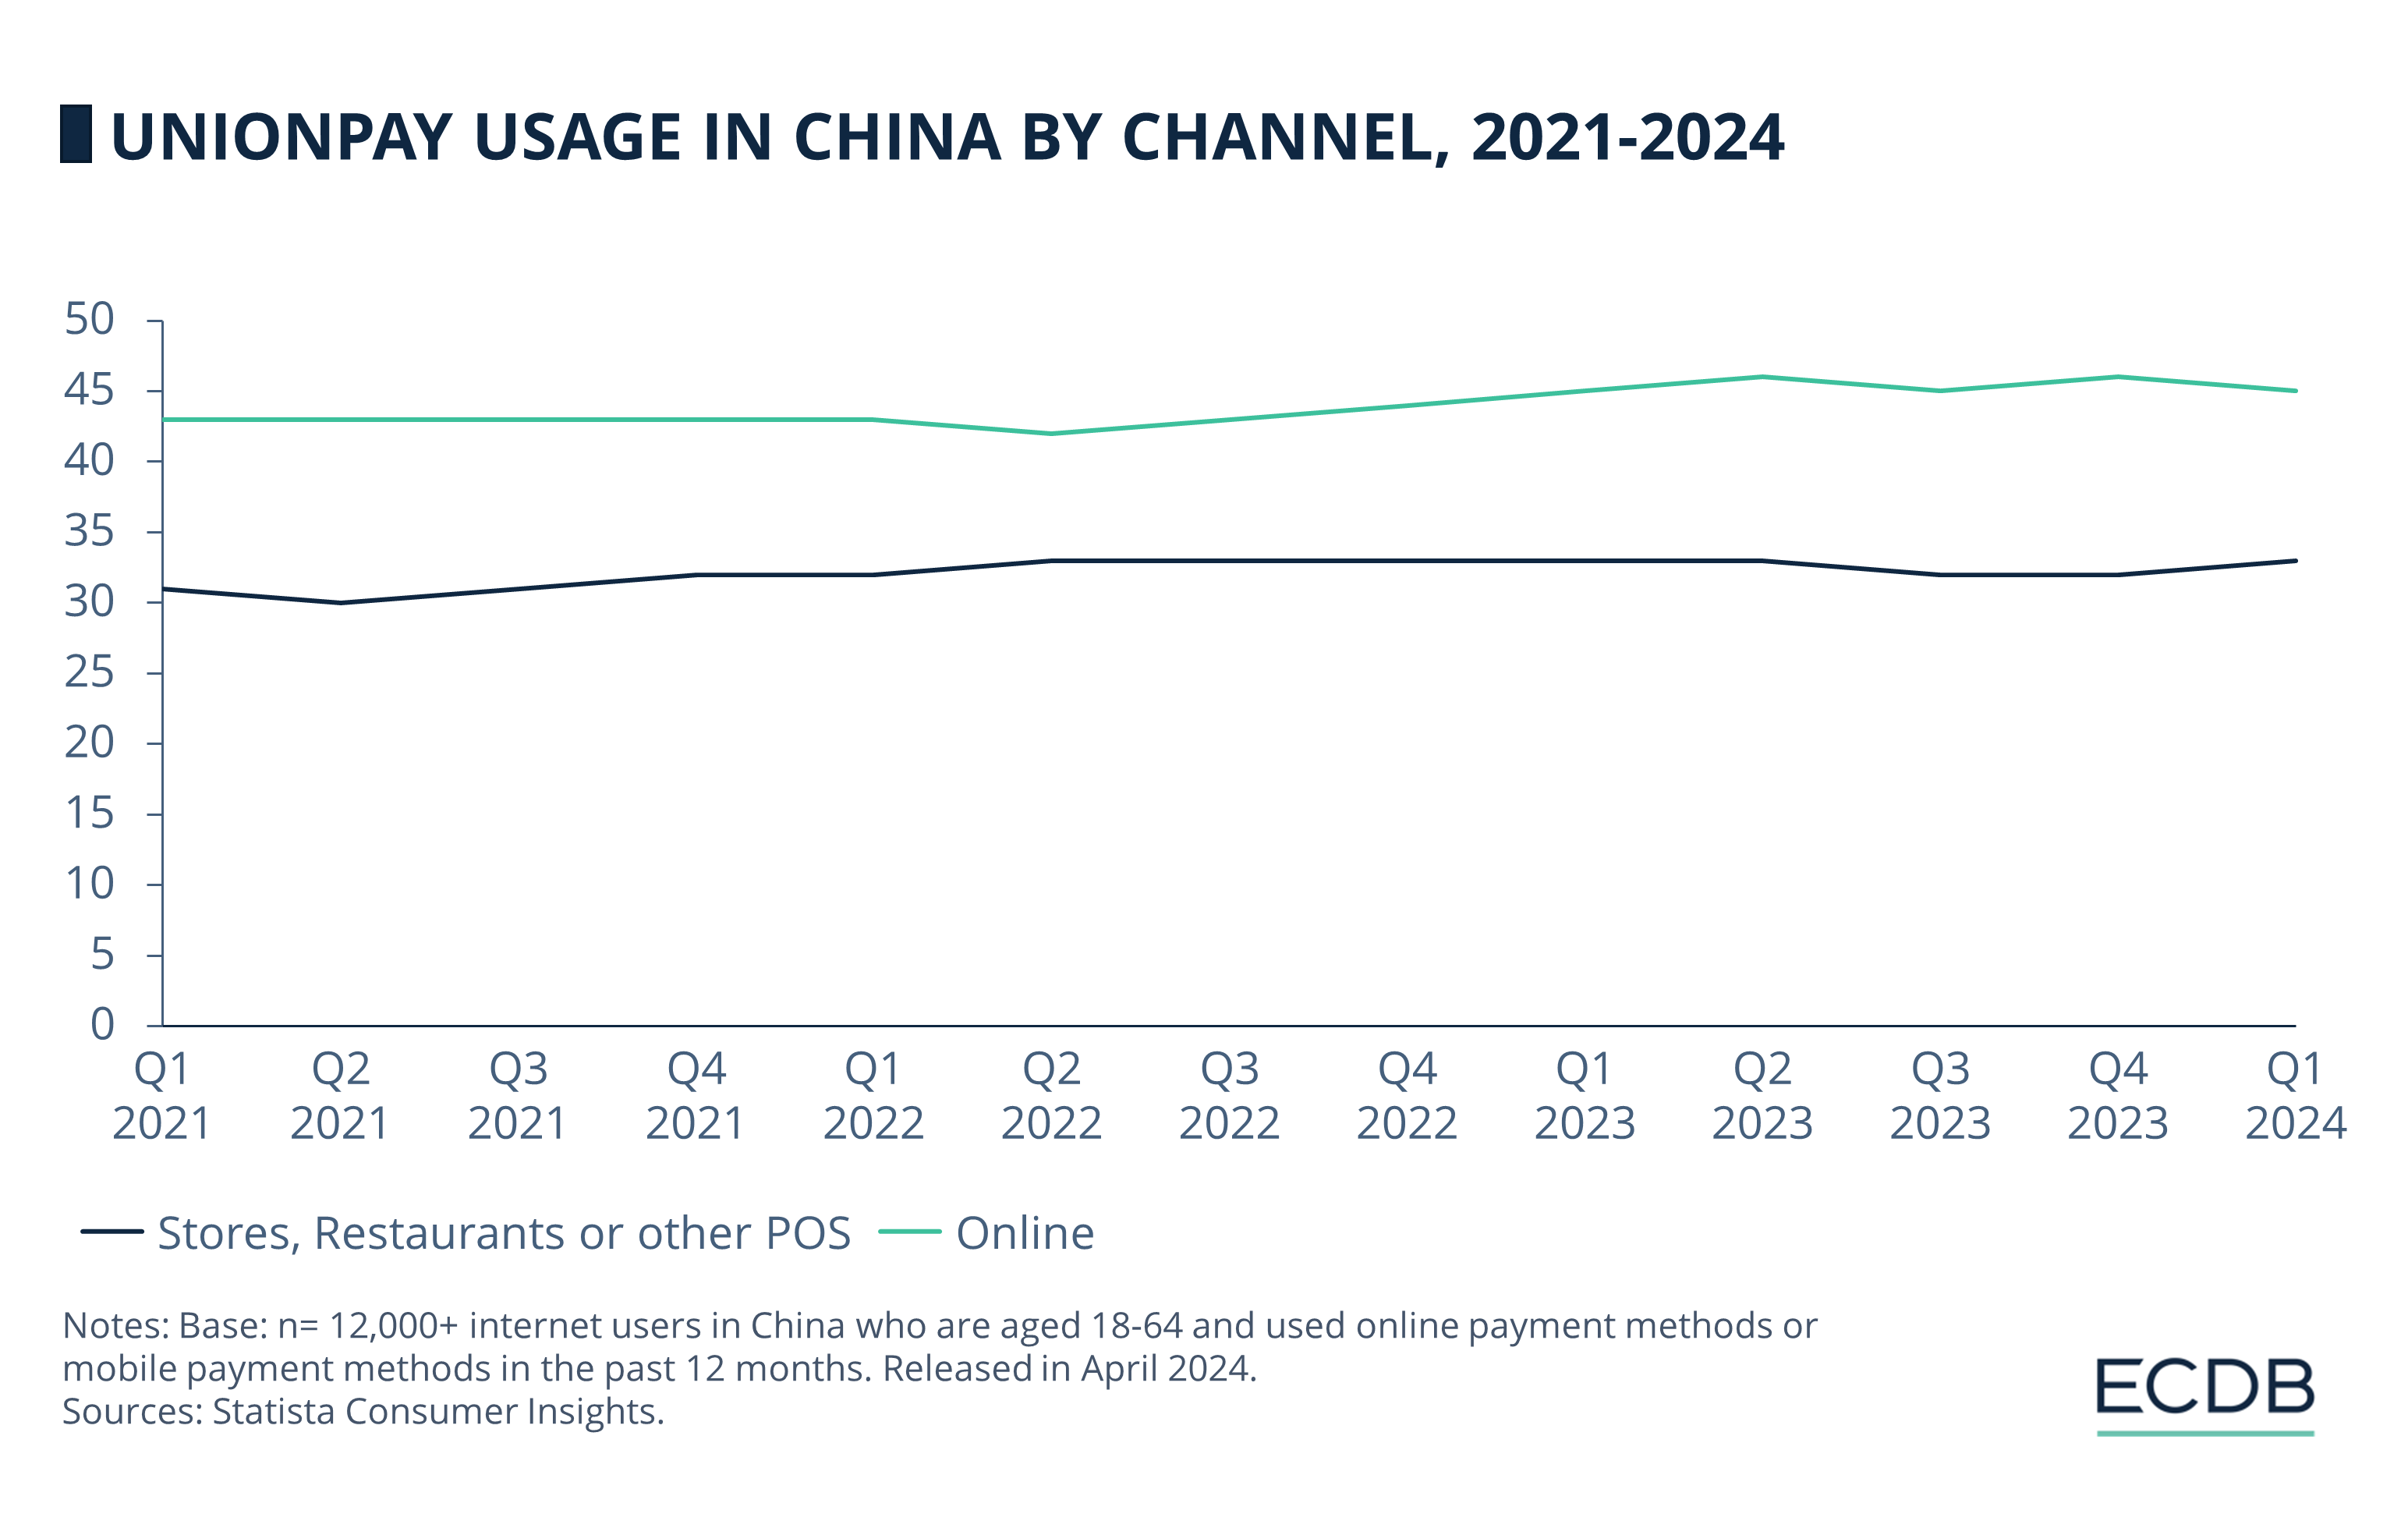 Unionpay Usage in China by Channel, 2021-2024